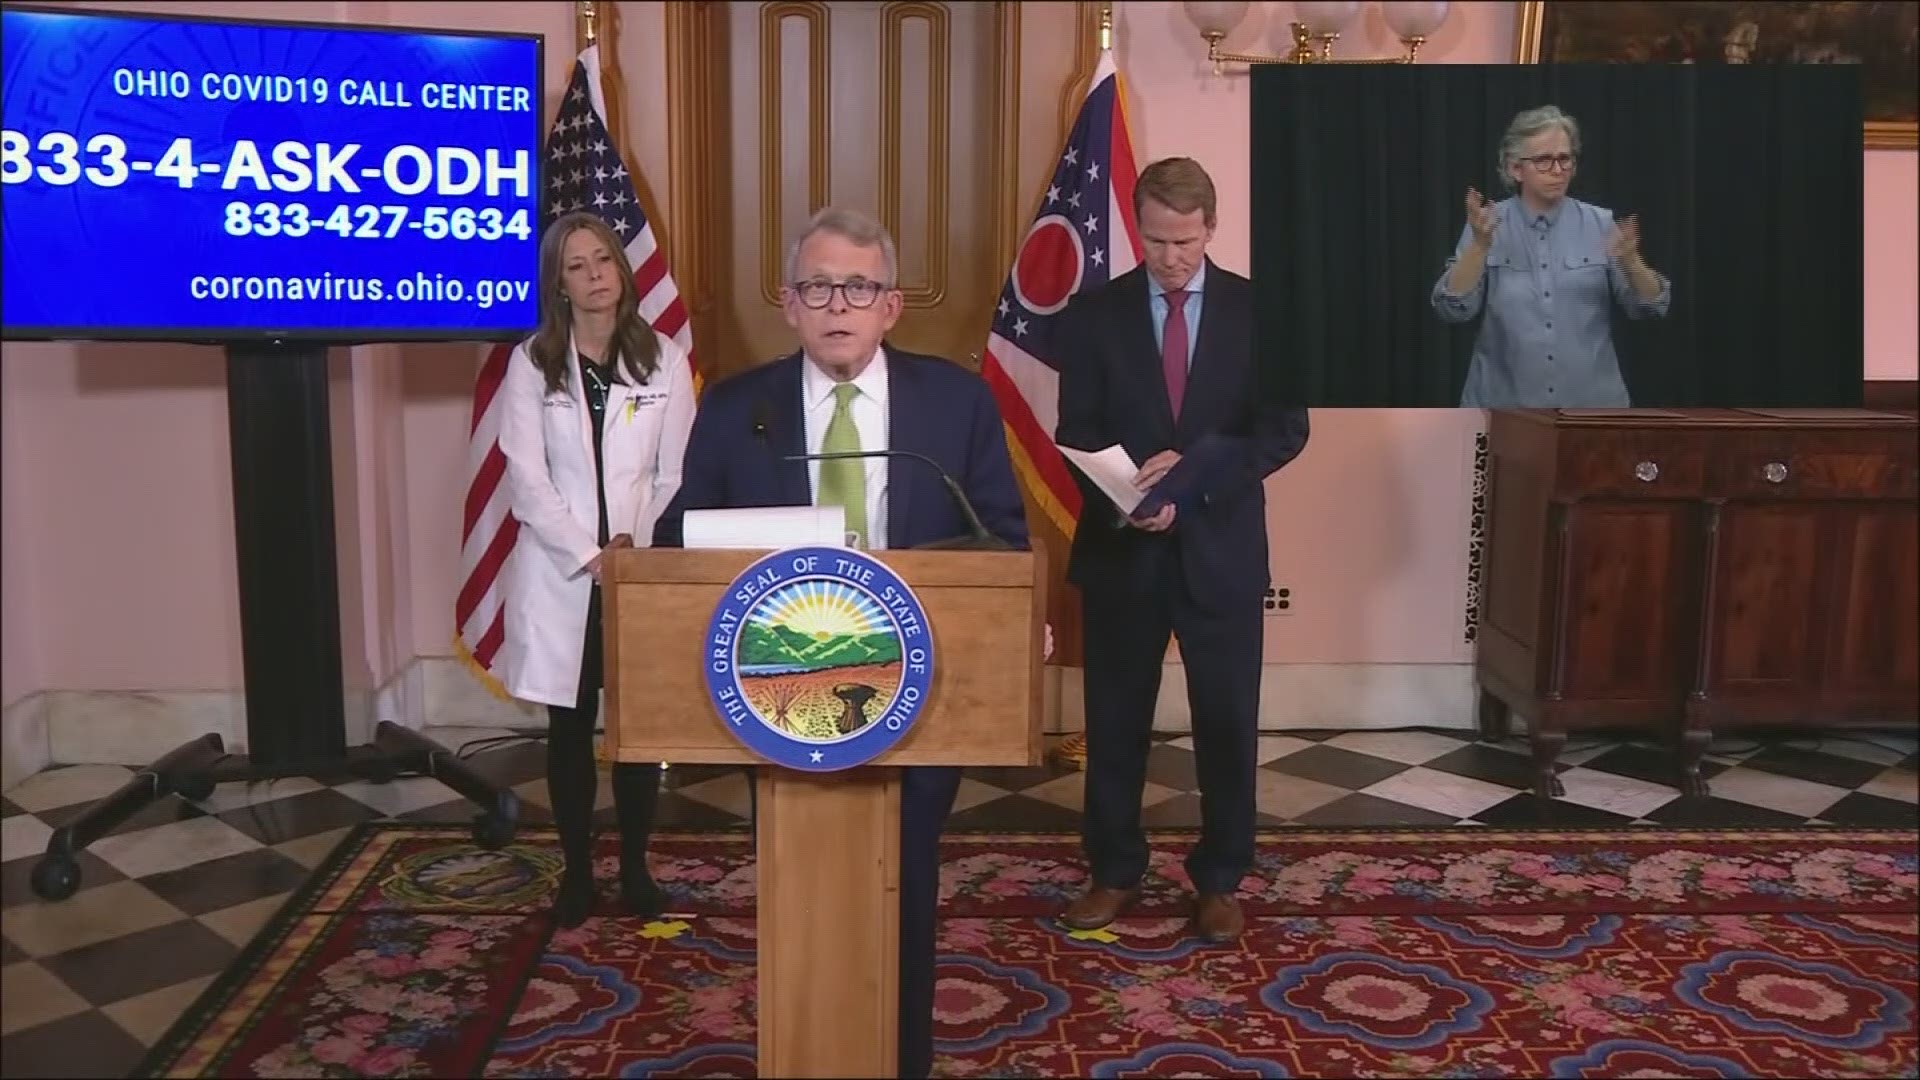 More changes coming.  Ohio Governor Mike DeWine announced that he has issued an executive order to close senior citizen centers at the close of business on Monday.